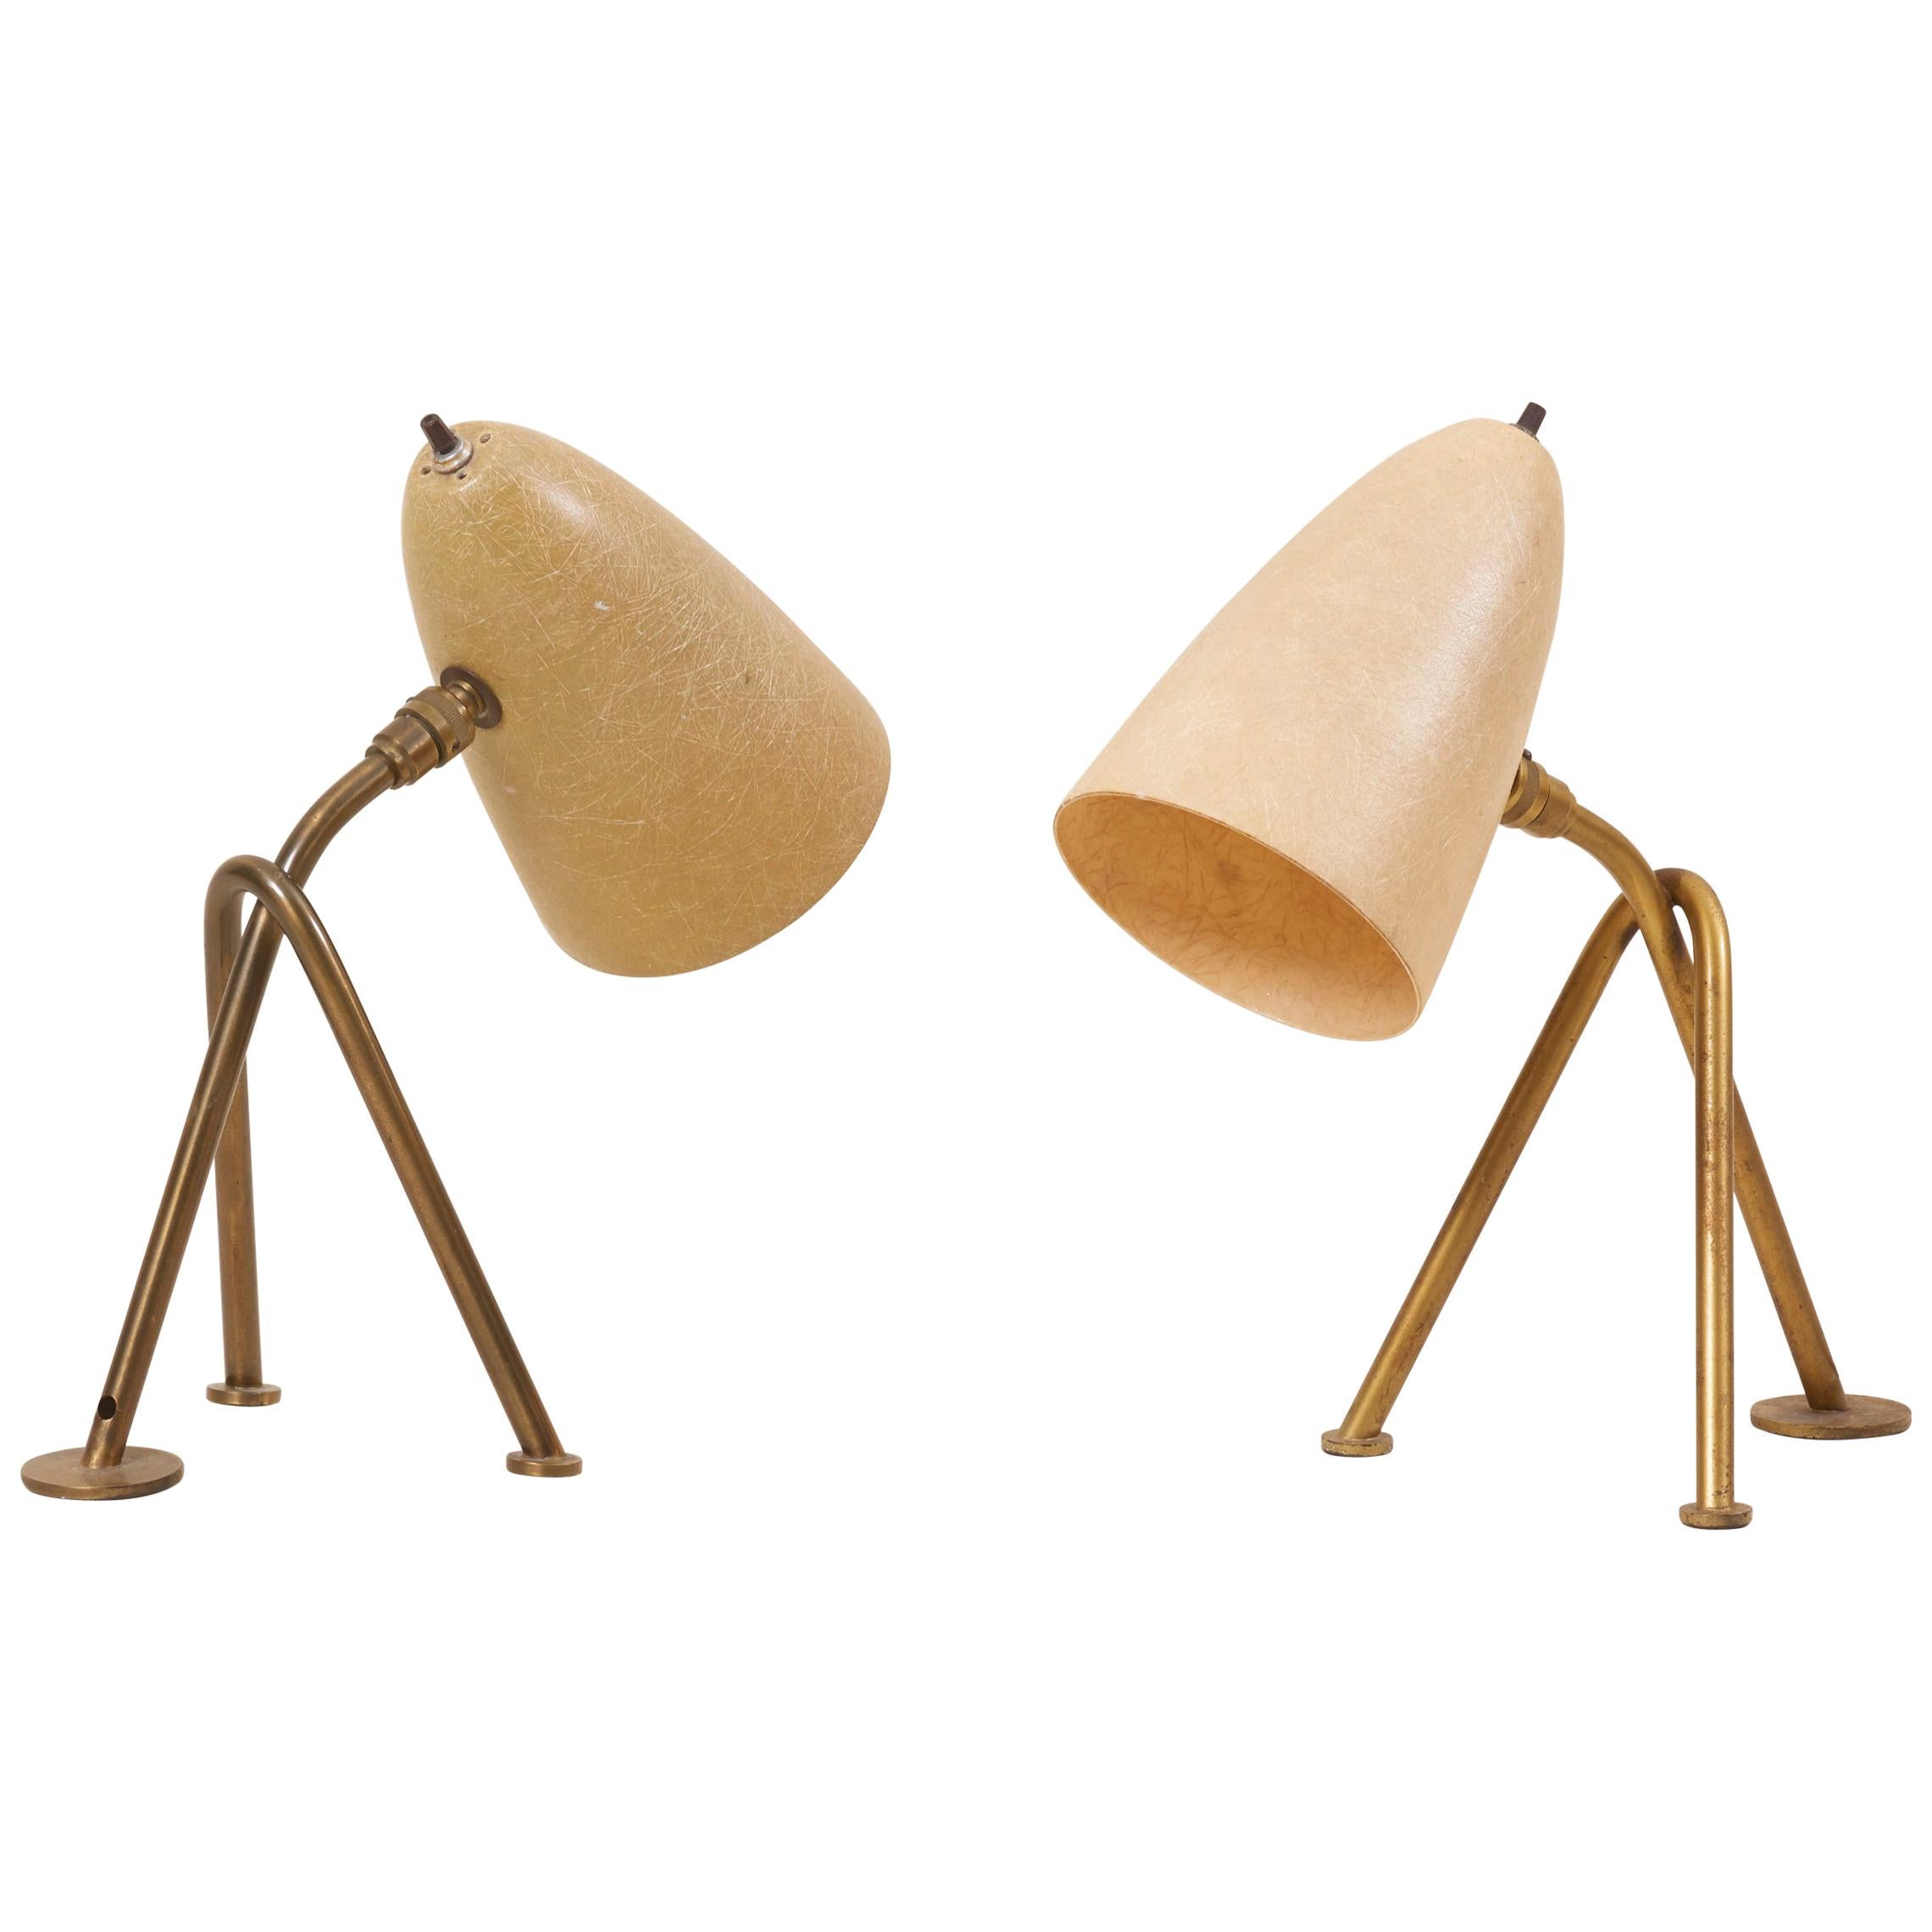 Pair of "Grasshopper" Table Lamps by Greta Grossman for Ralph O. Smith, US 1950s